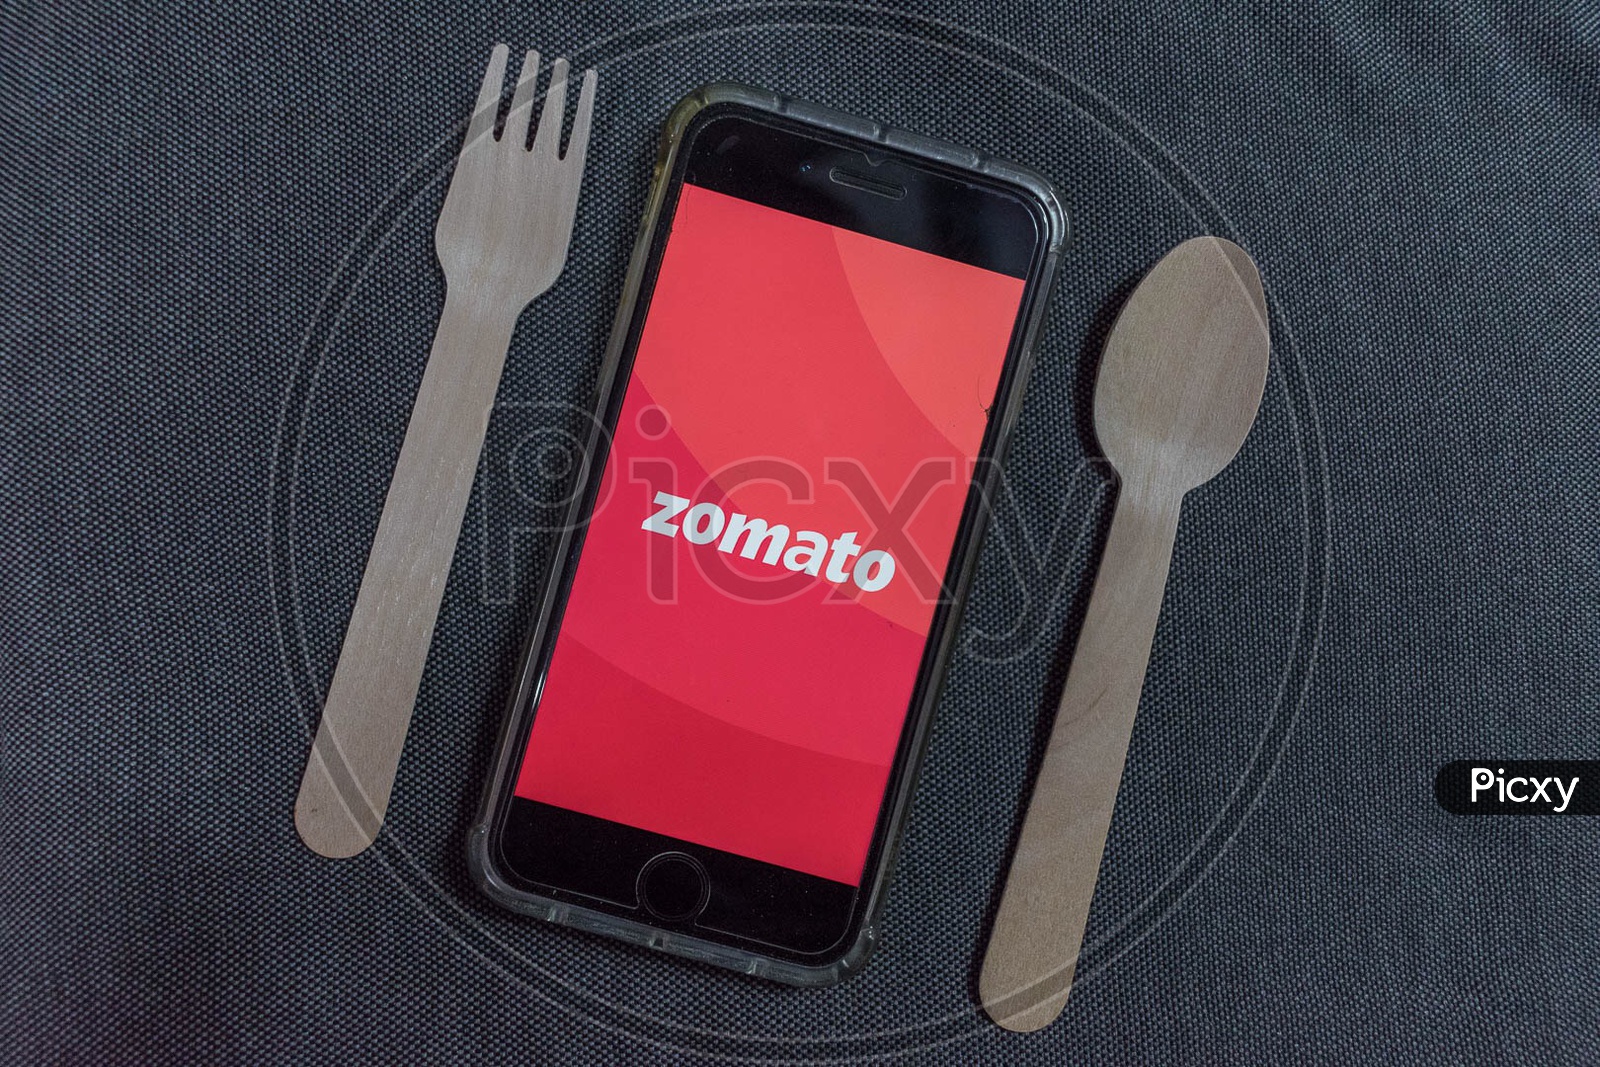 Zomato online food delivery app for mobile